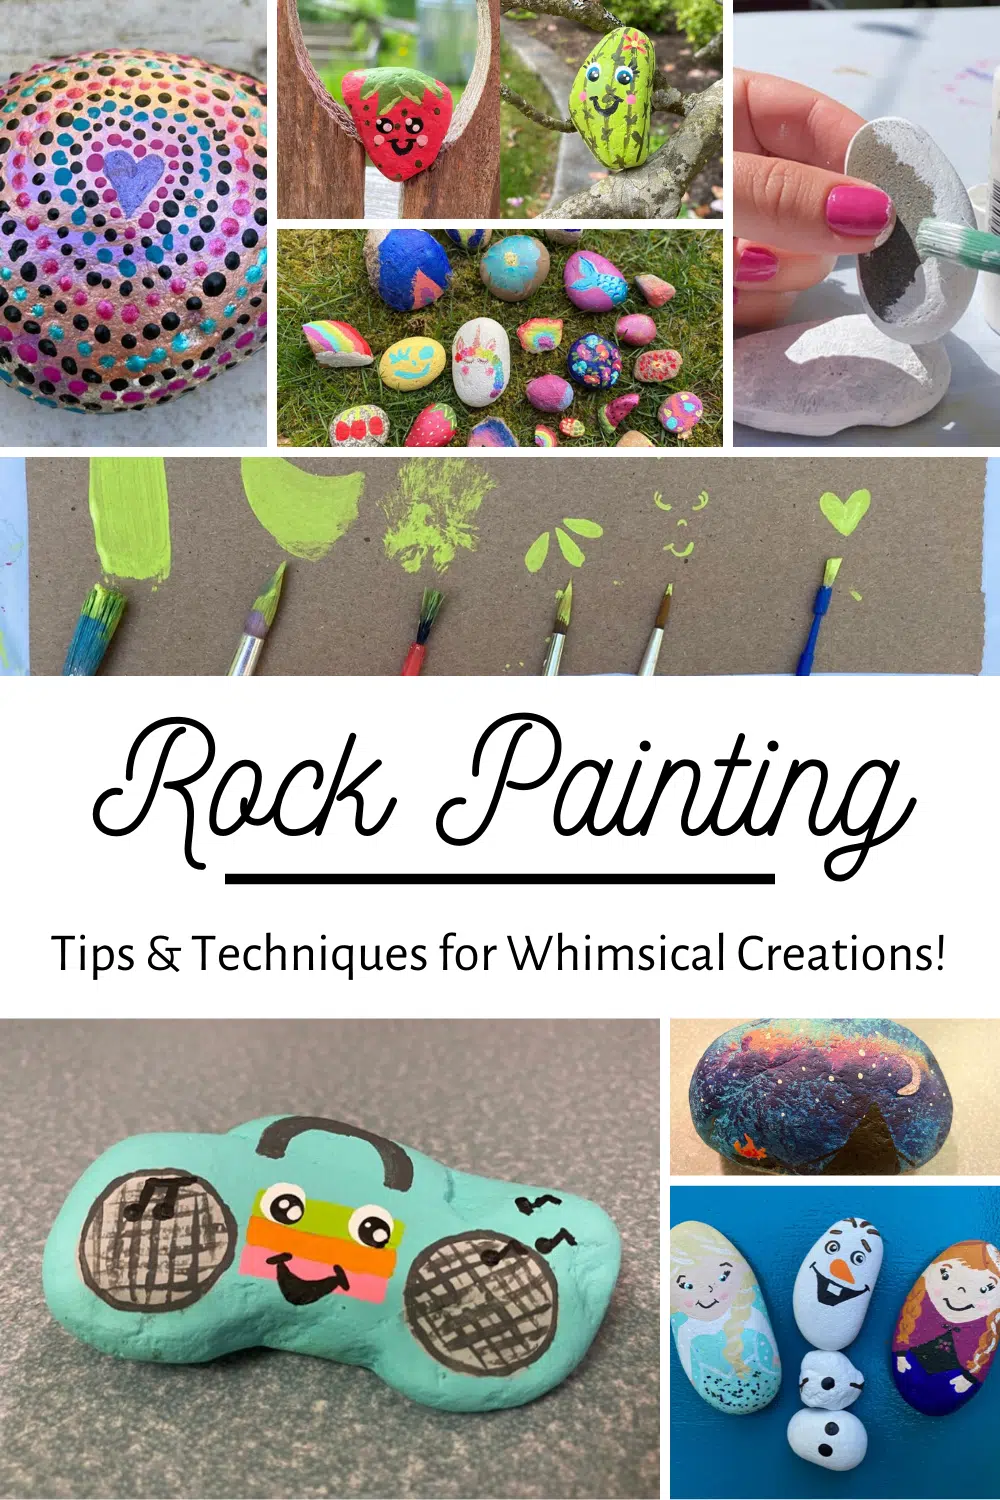 Rock painting tips - how to make the best painted rocks.